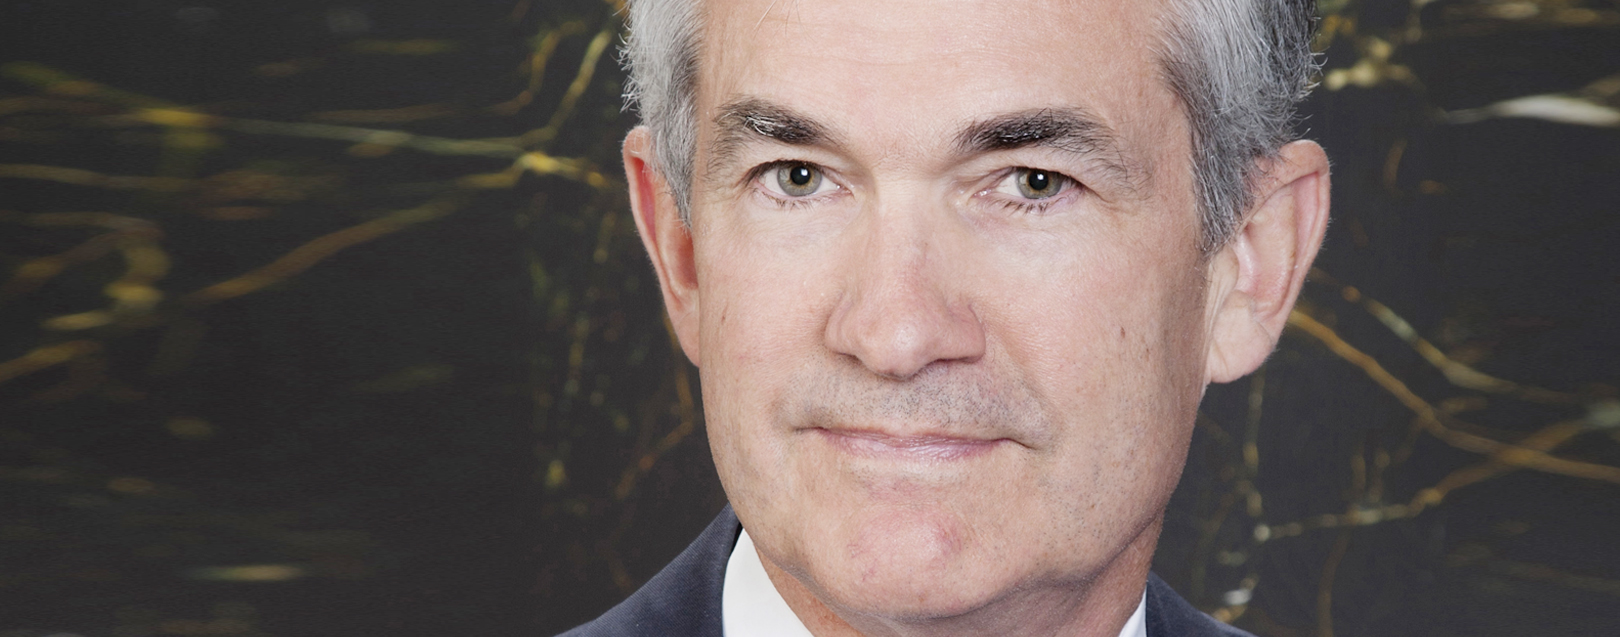 Jerome Powell to take over Janet Yellen as Fed’s chairman